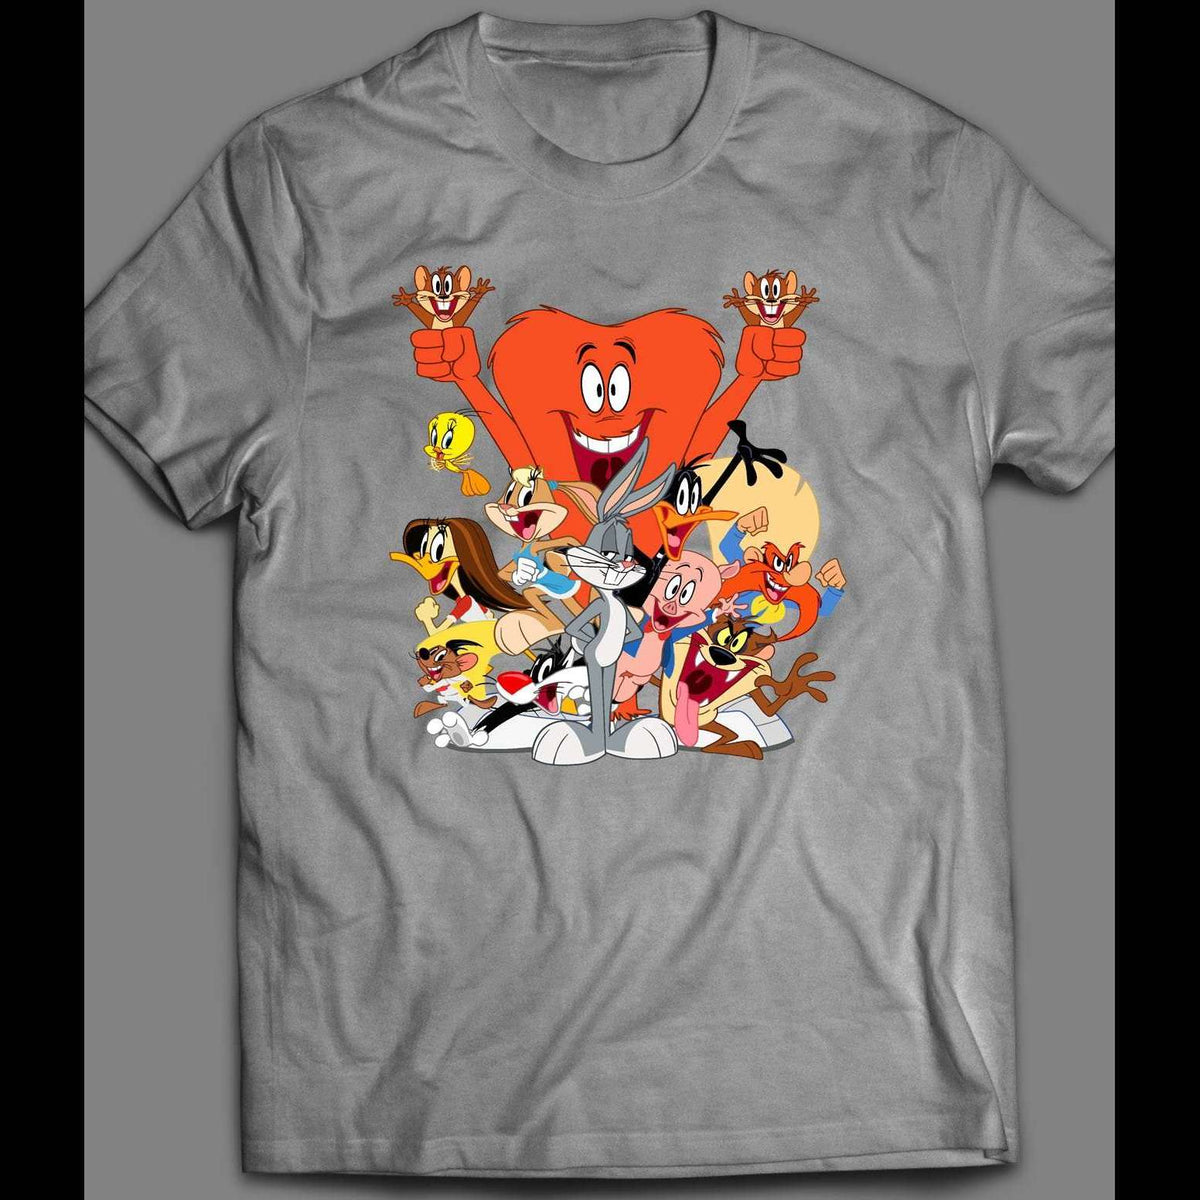 OLDSKOOL LOONEY CARTOON CHARACTERS CUSTOM T-SHIRT | 80's, 90's to Today Quality ...